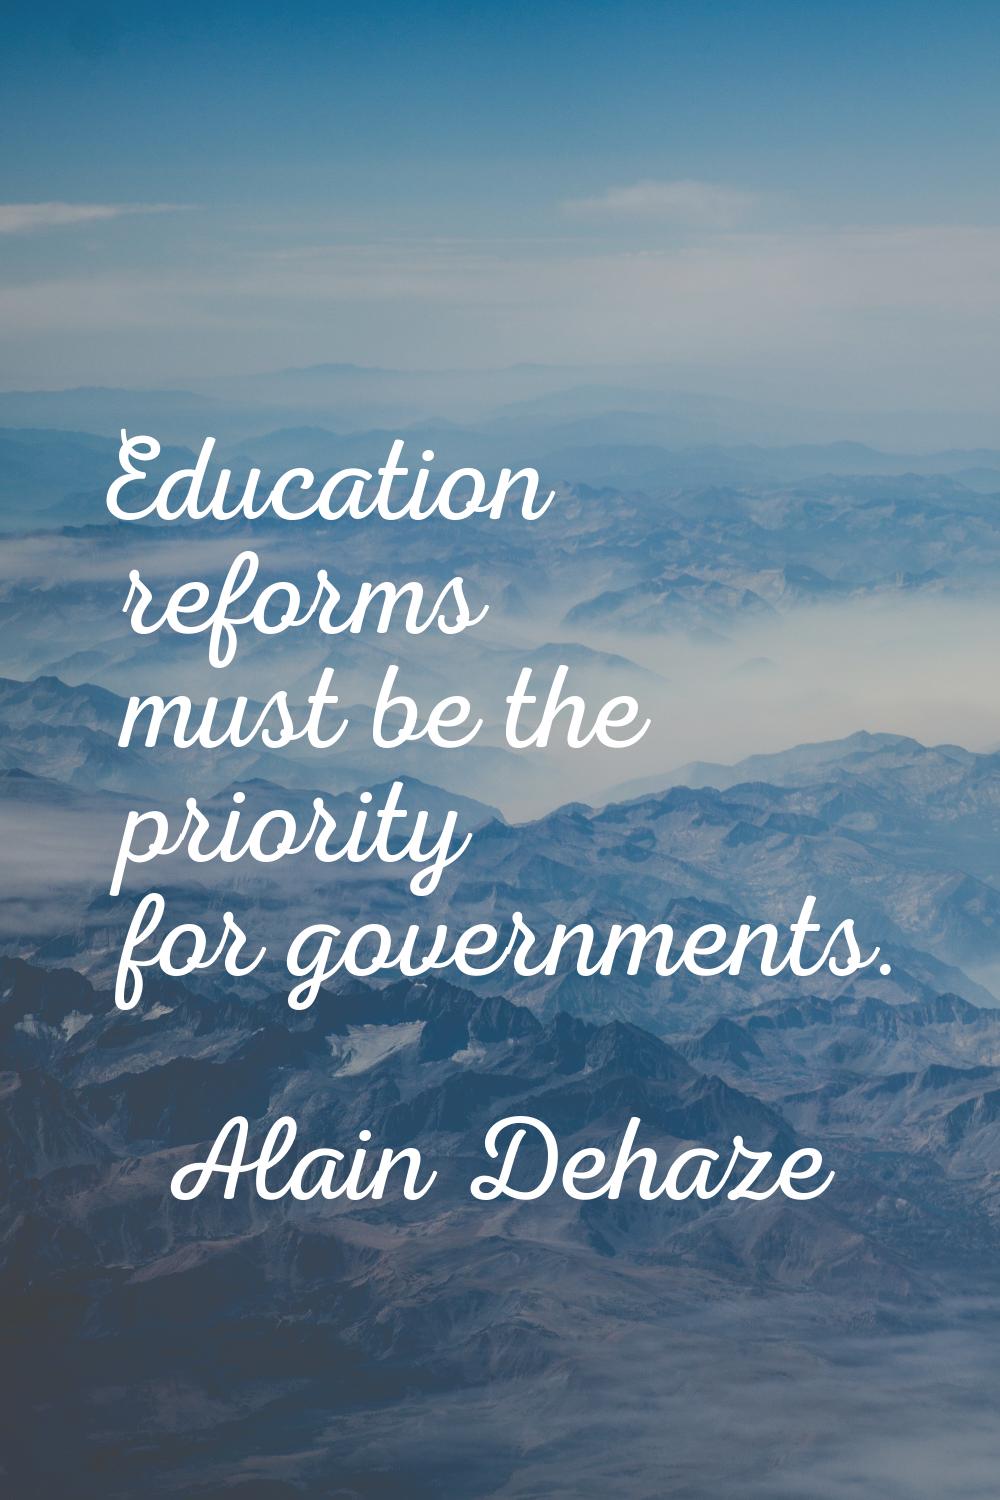 Education reforms must be the priority for governments.